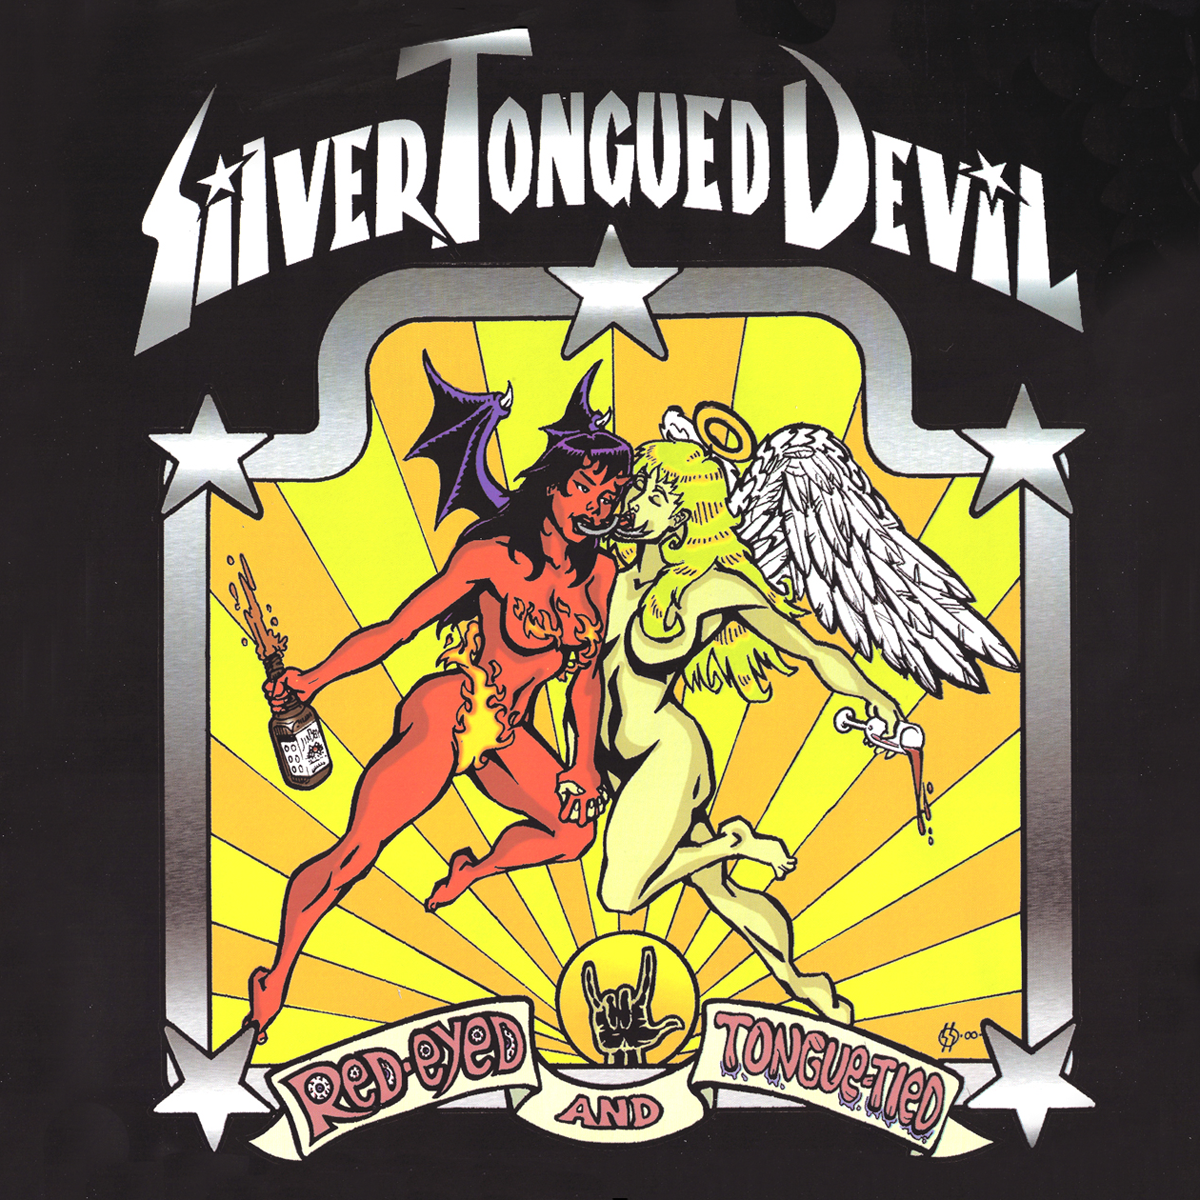 Silver Tongued Devil- Red Eyed And Tongue Tied LP ~NASHVILLE PUSSY / RARE RED WAX!